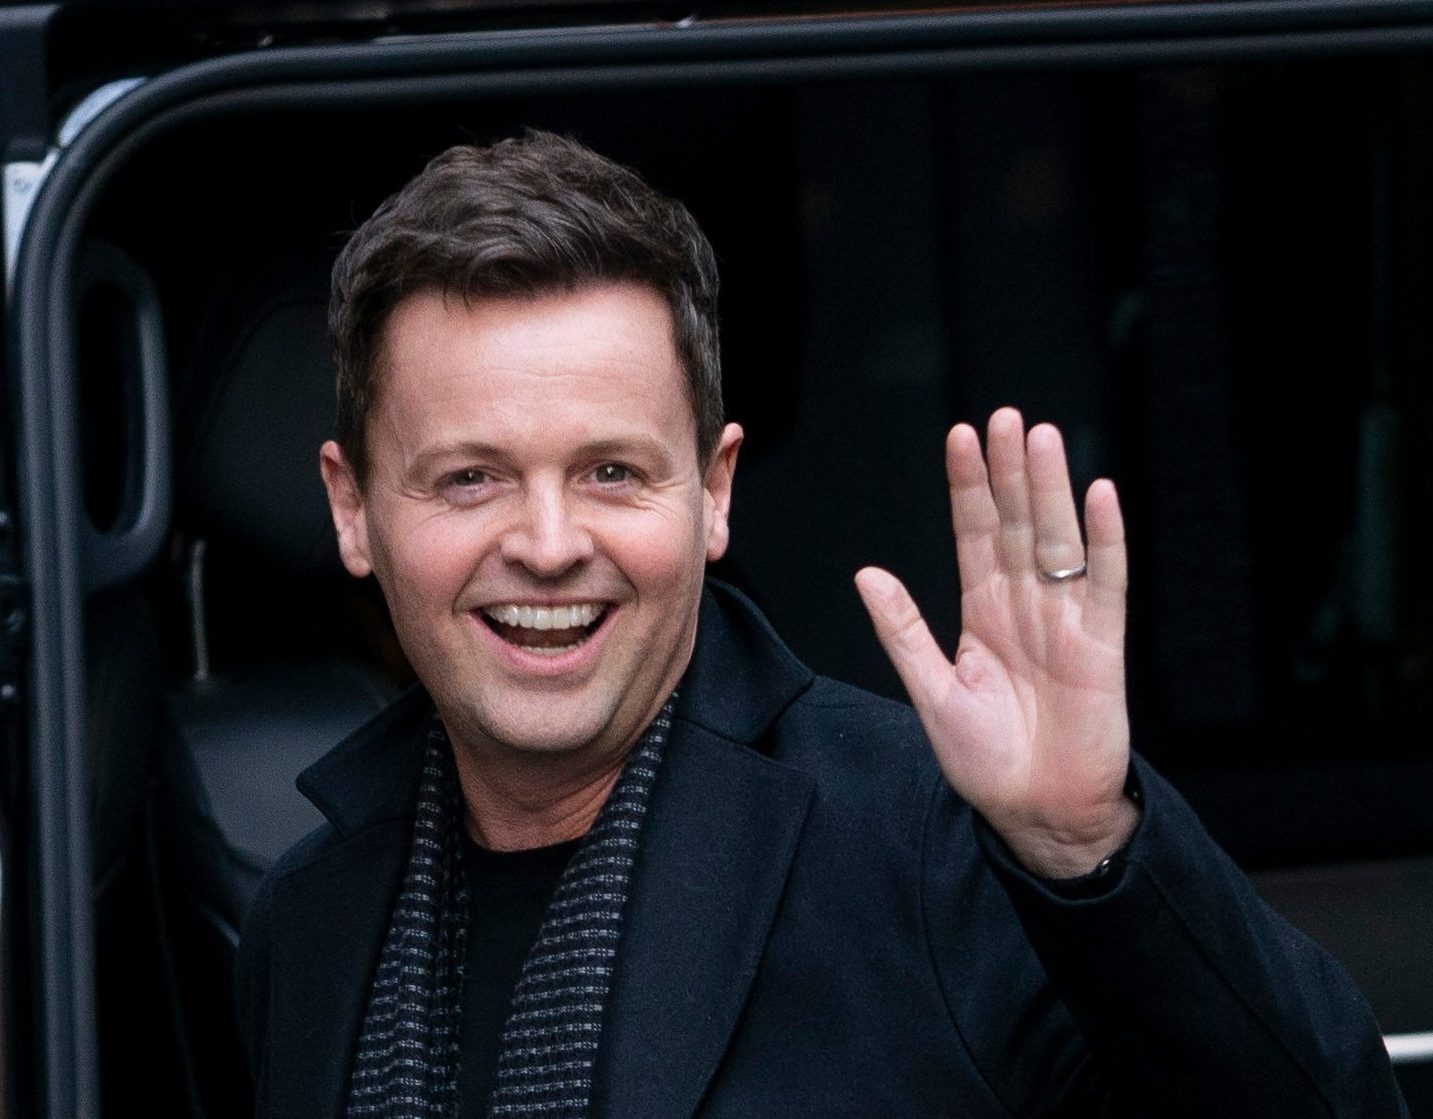 How tall is Declan Donnelly, and what's his net worth?